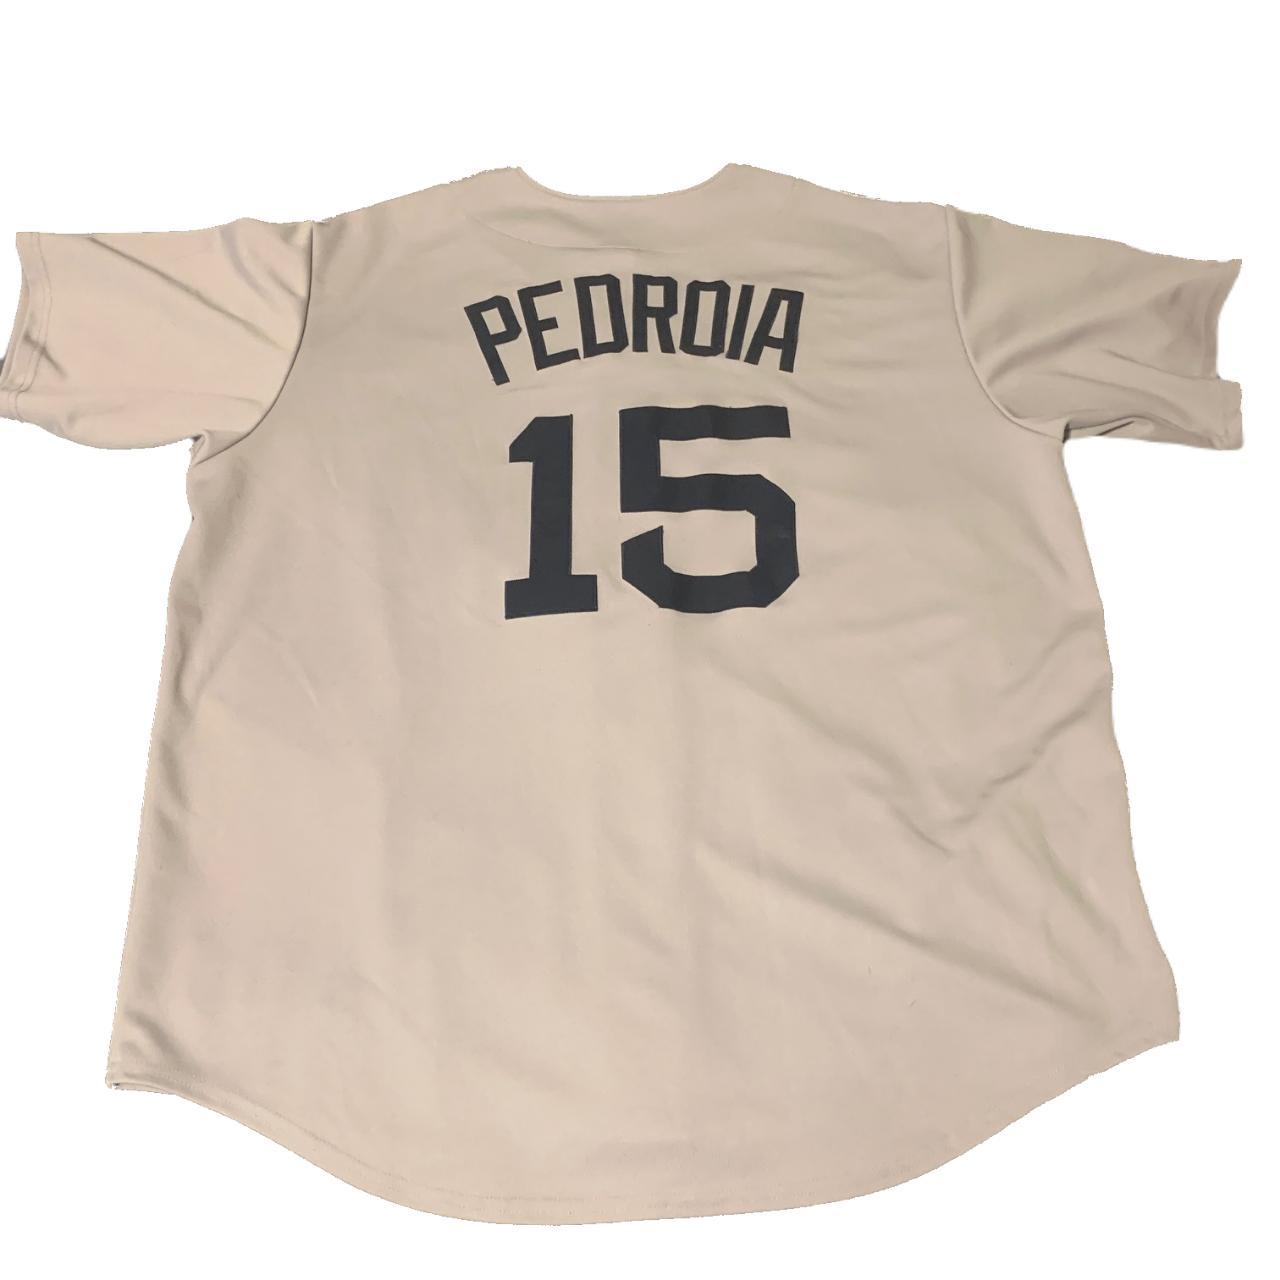 RED SOX PEDROIA JERSEY ⚡️ - Size: S/M Color: - Depop